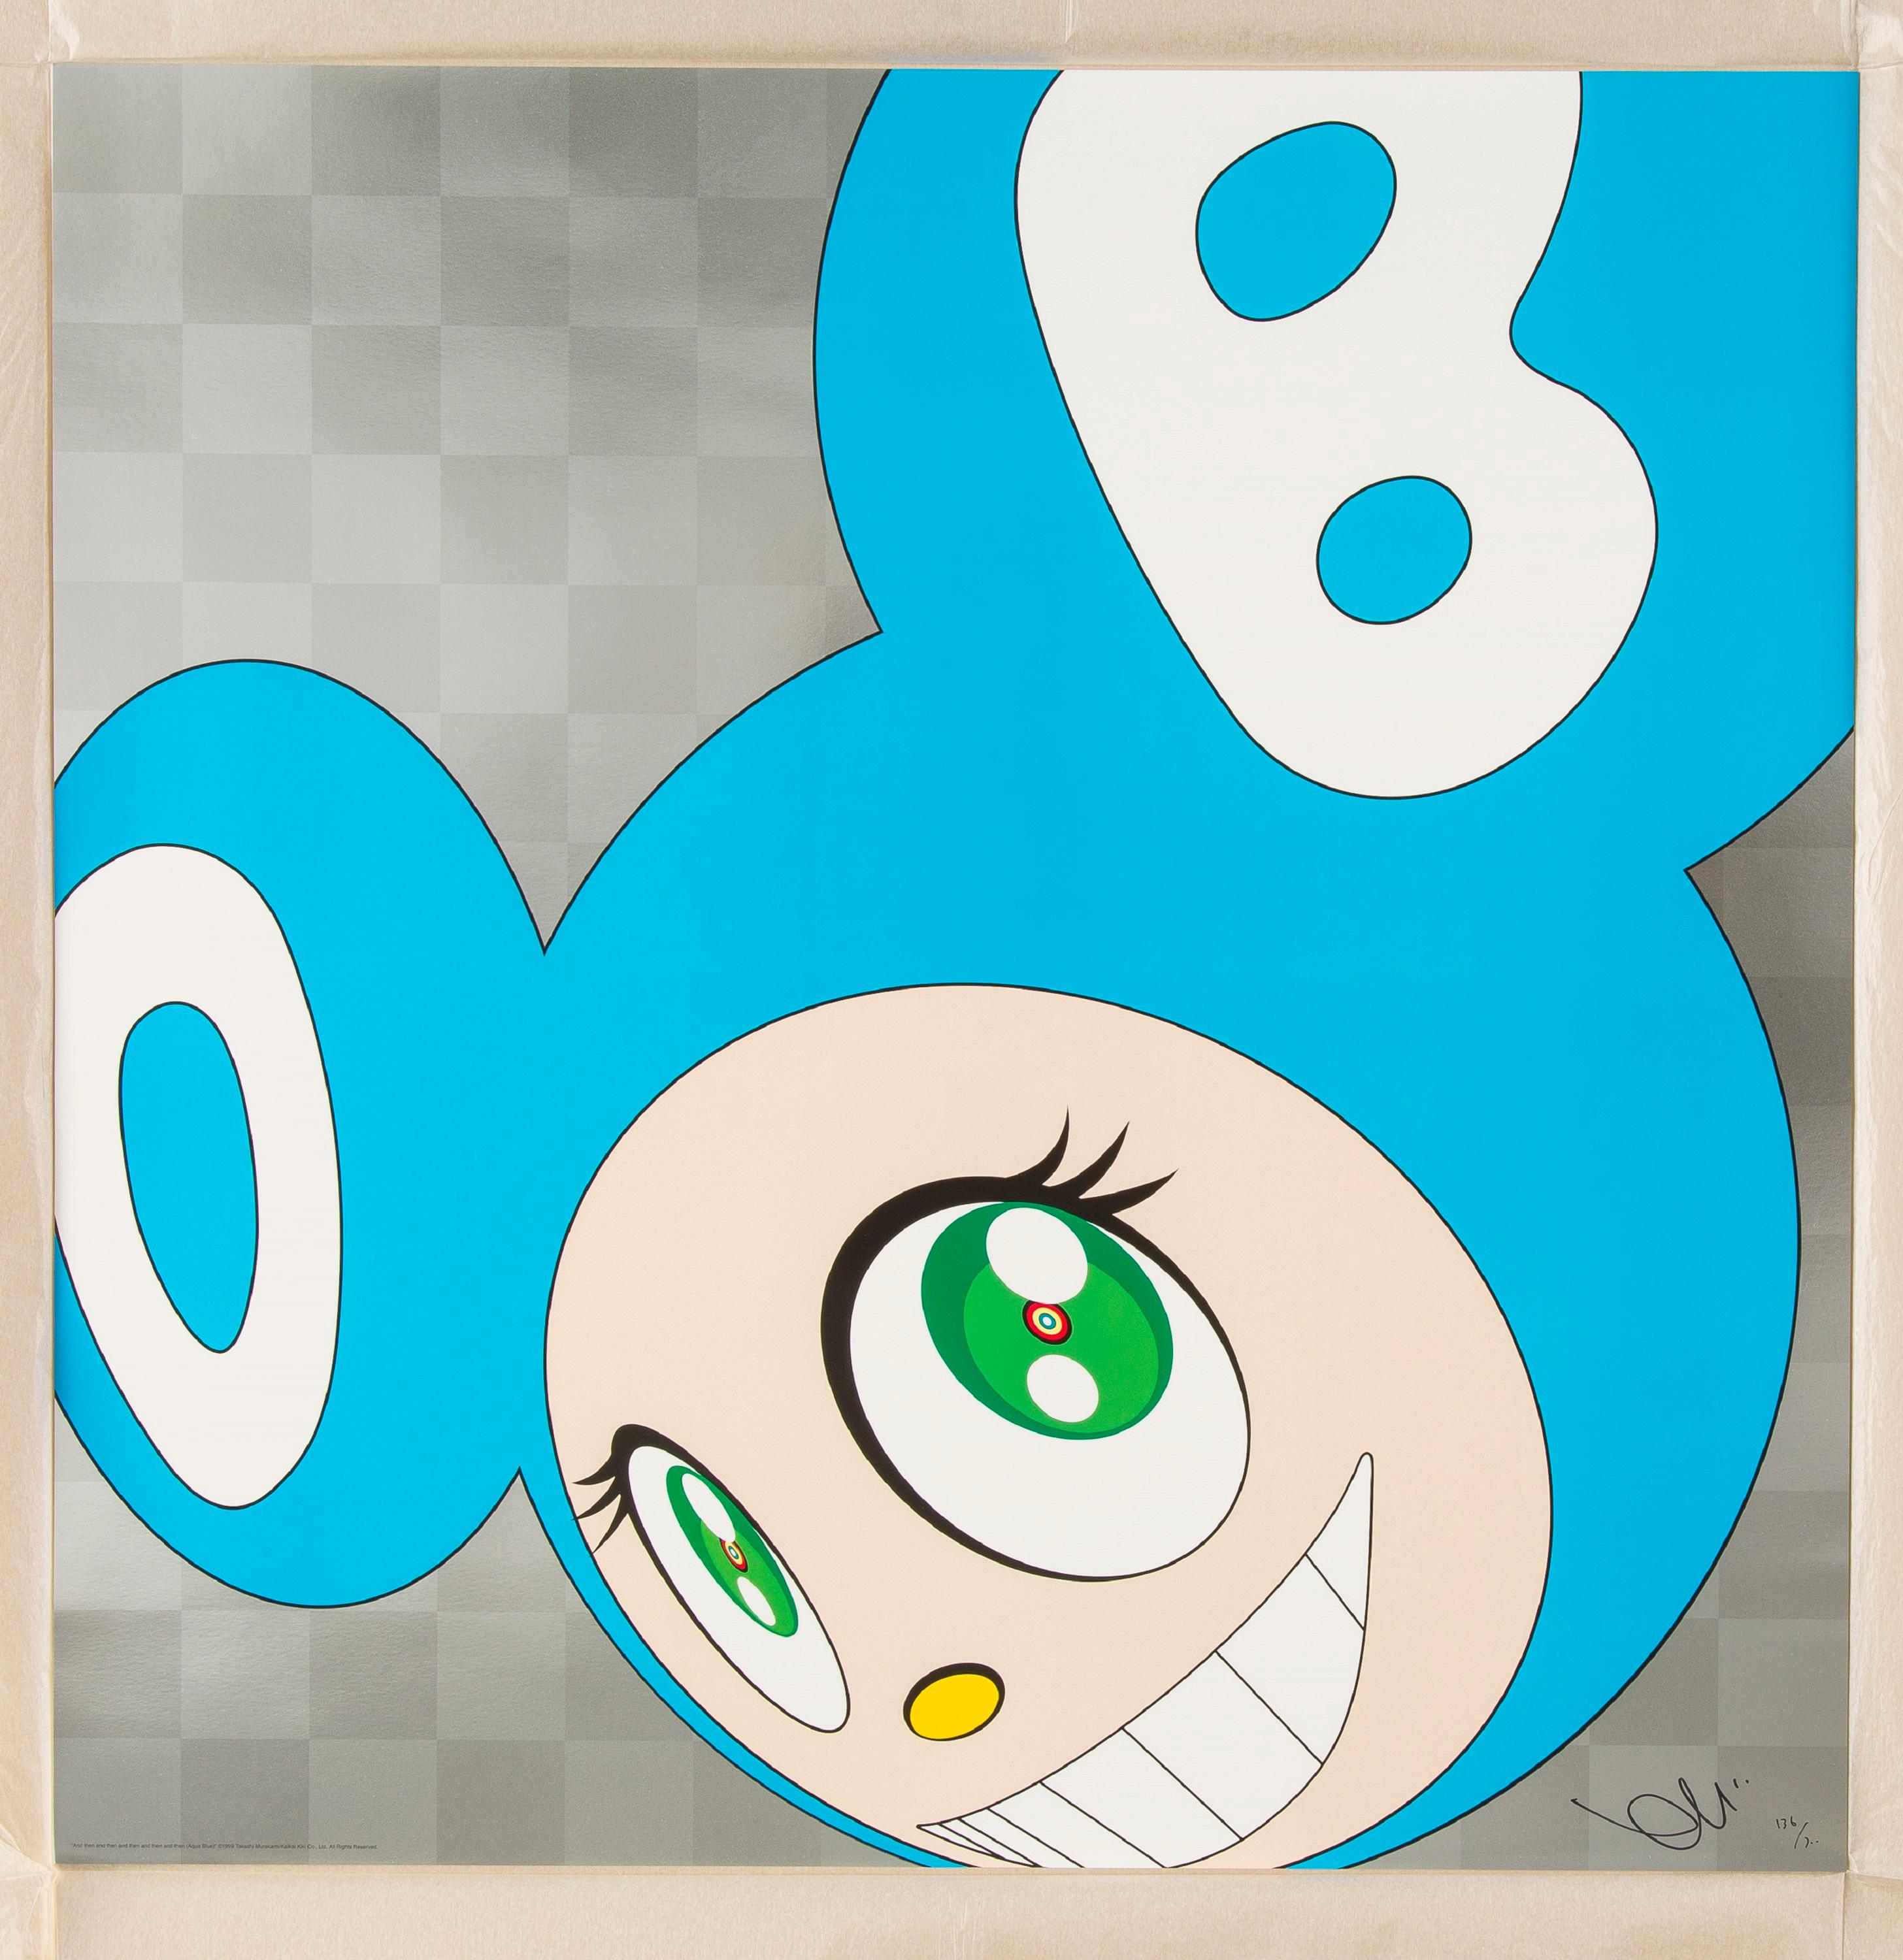 Takashi Murakami Figurative Print - And then and then... (aqua blue) Limited Edition (print) by Murakami signed 